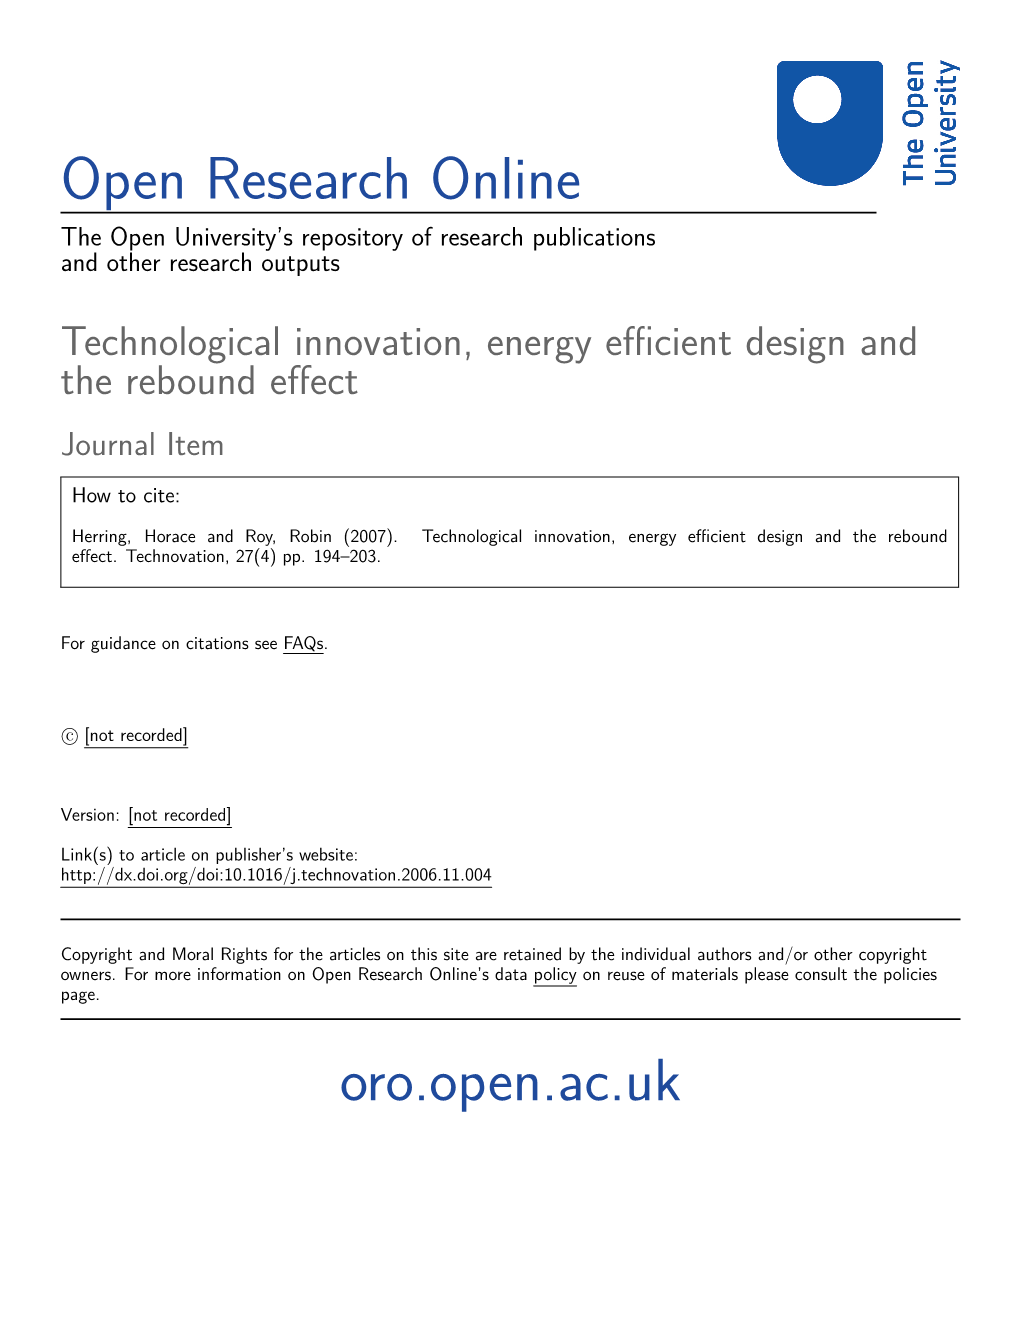 Technological Innovation, Energy Efficient Design and the Rebound Effect